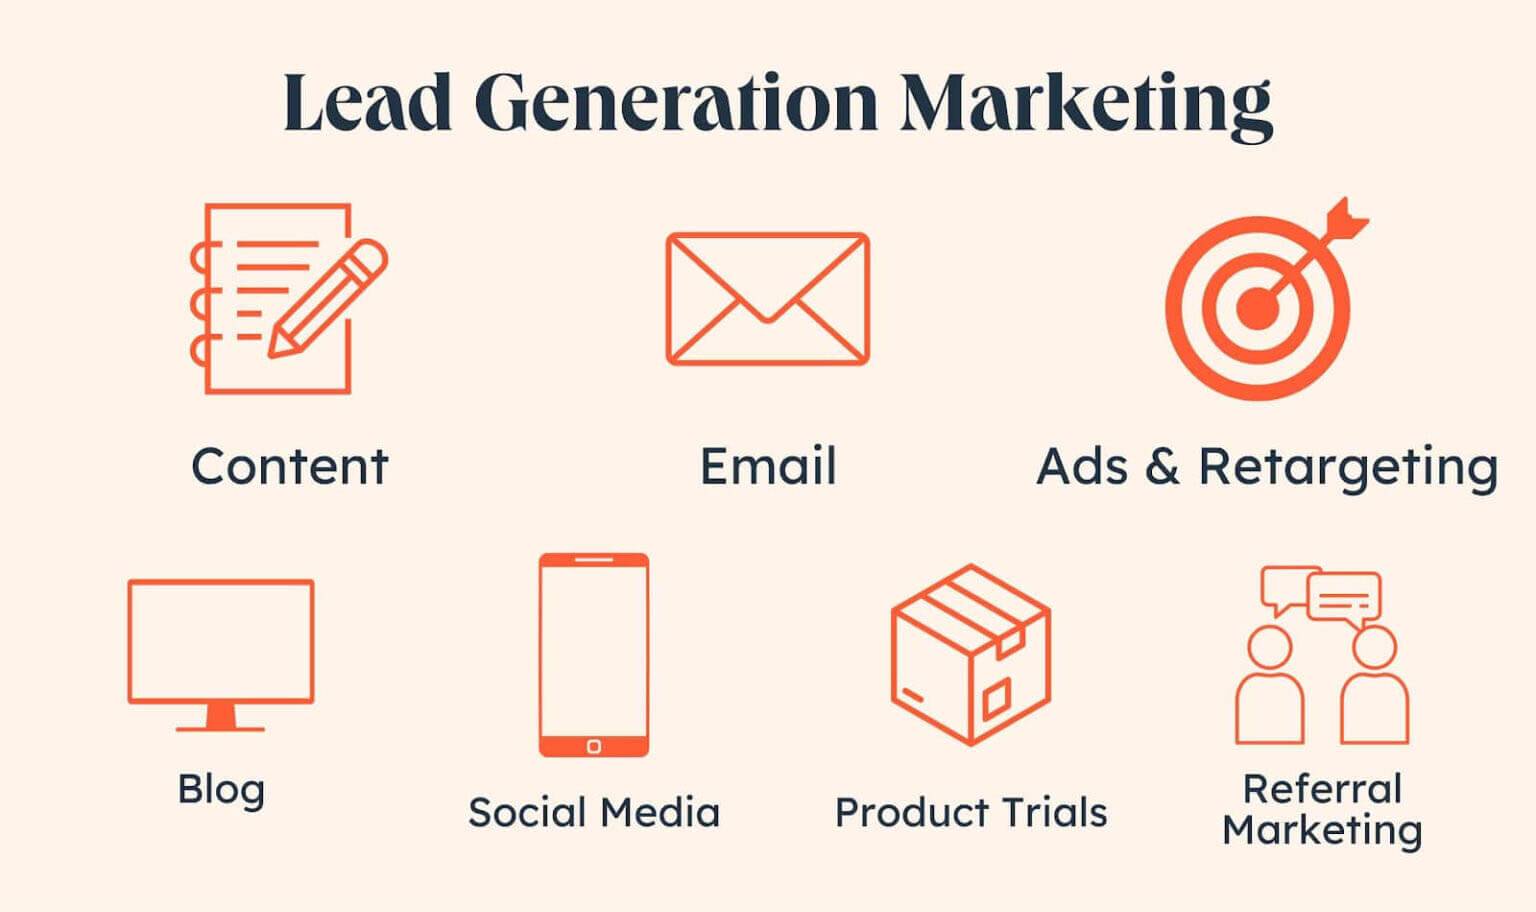 5. Customizing Your Content for Better Lead Generation